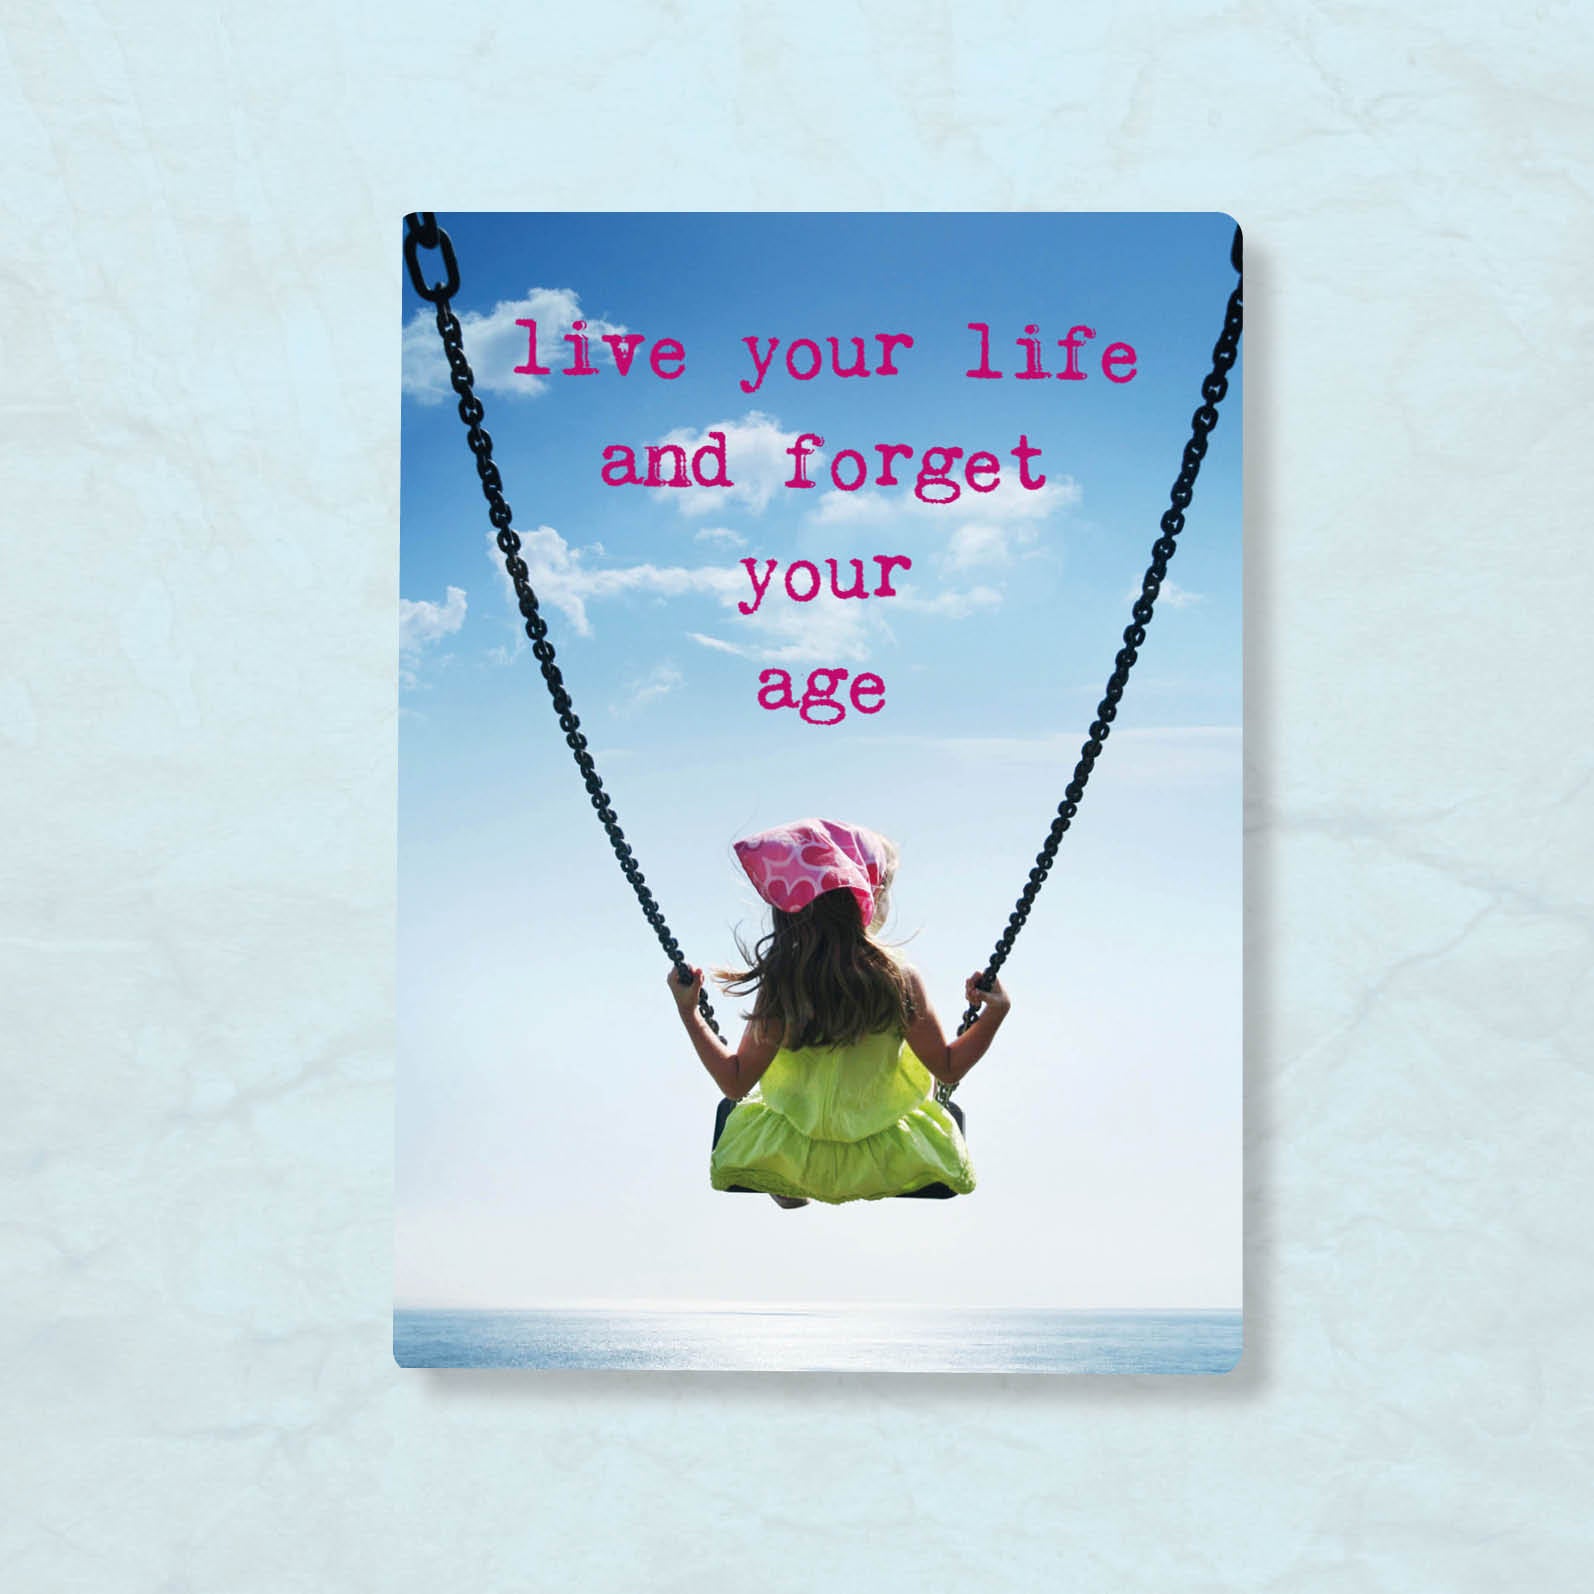 Magneet "Live your life and forget your age" – Zintenz Organic Cards